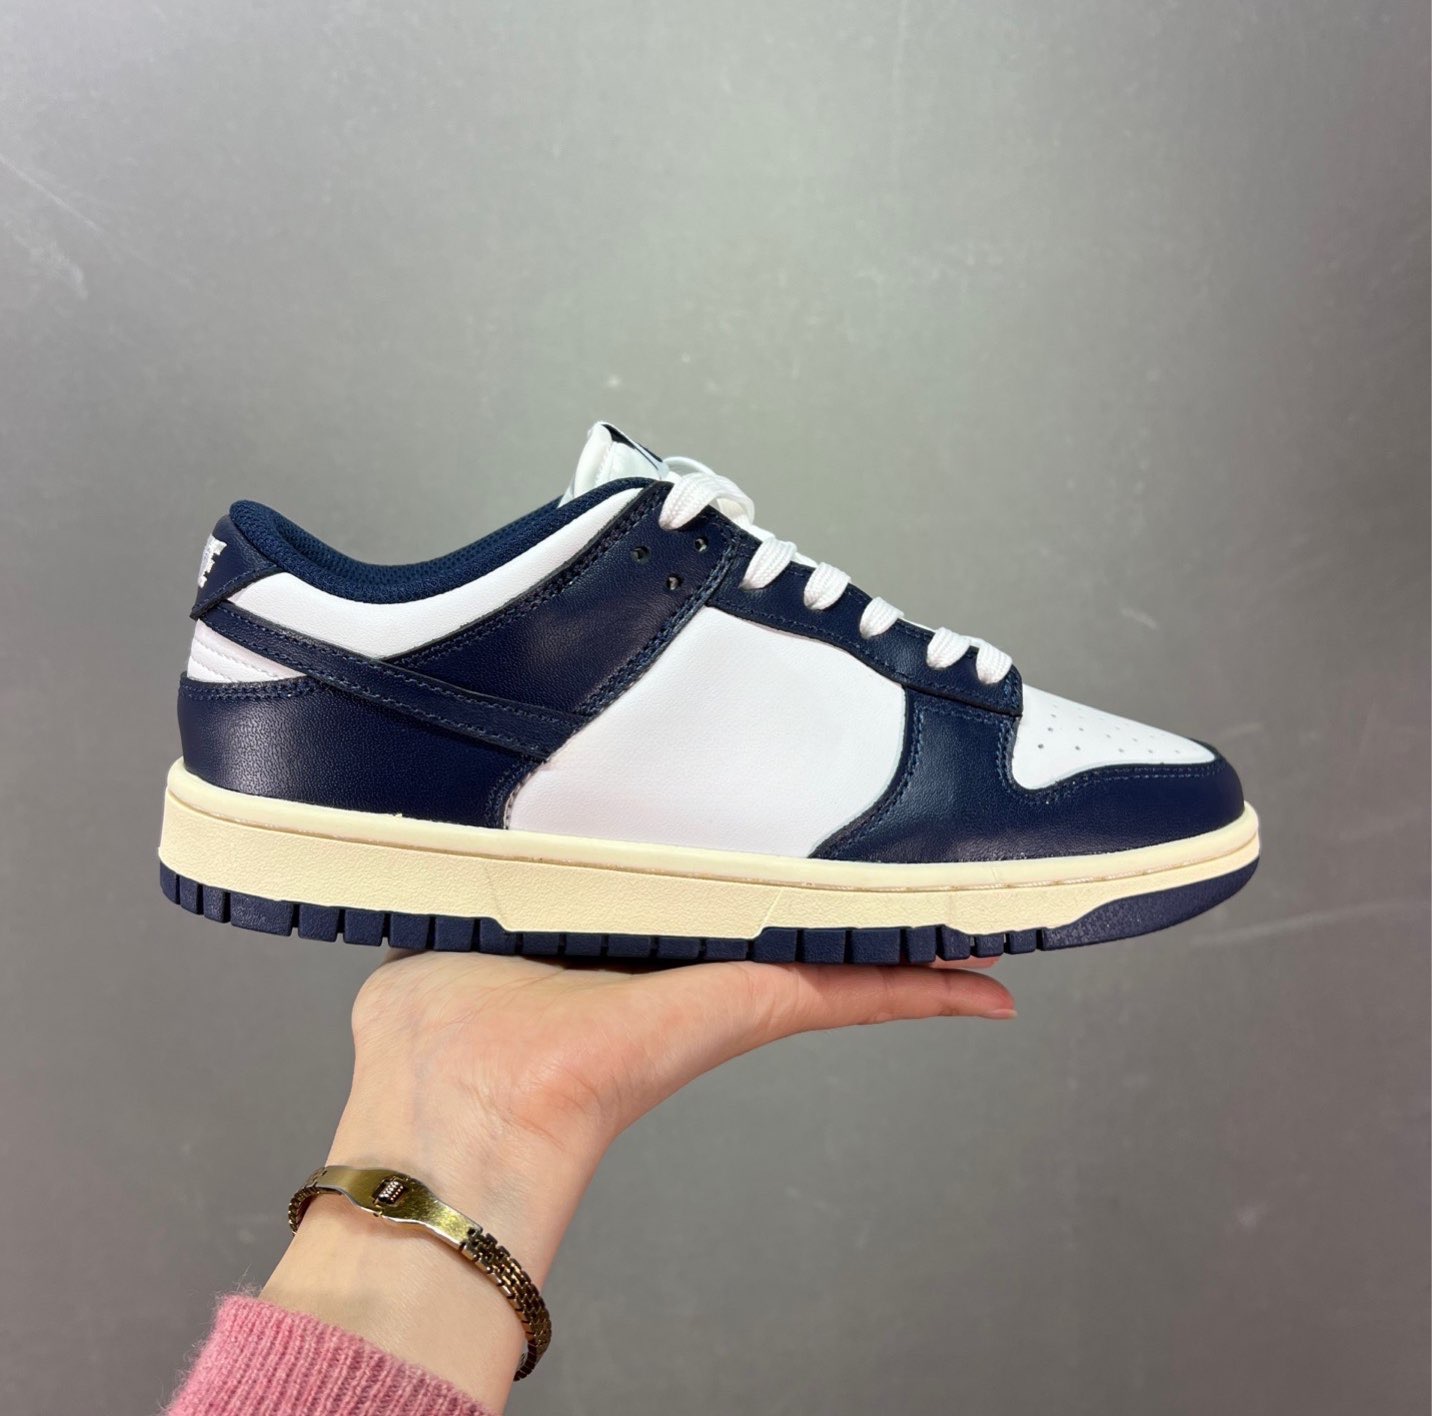 

women men Free Shipping shoes sb low university running shoes Panda midnight navy white Kentucky Medium Olive Triple Pink Chicago Grey Fog, As shown in the picture